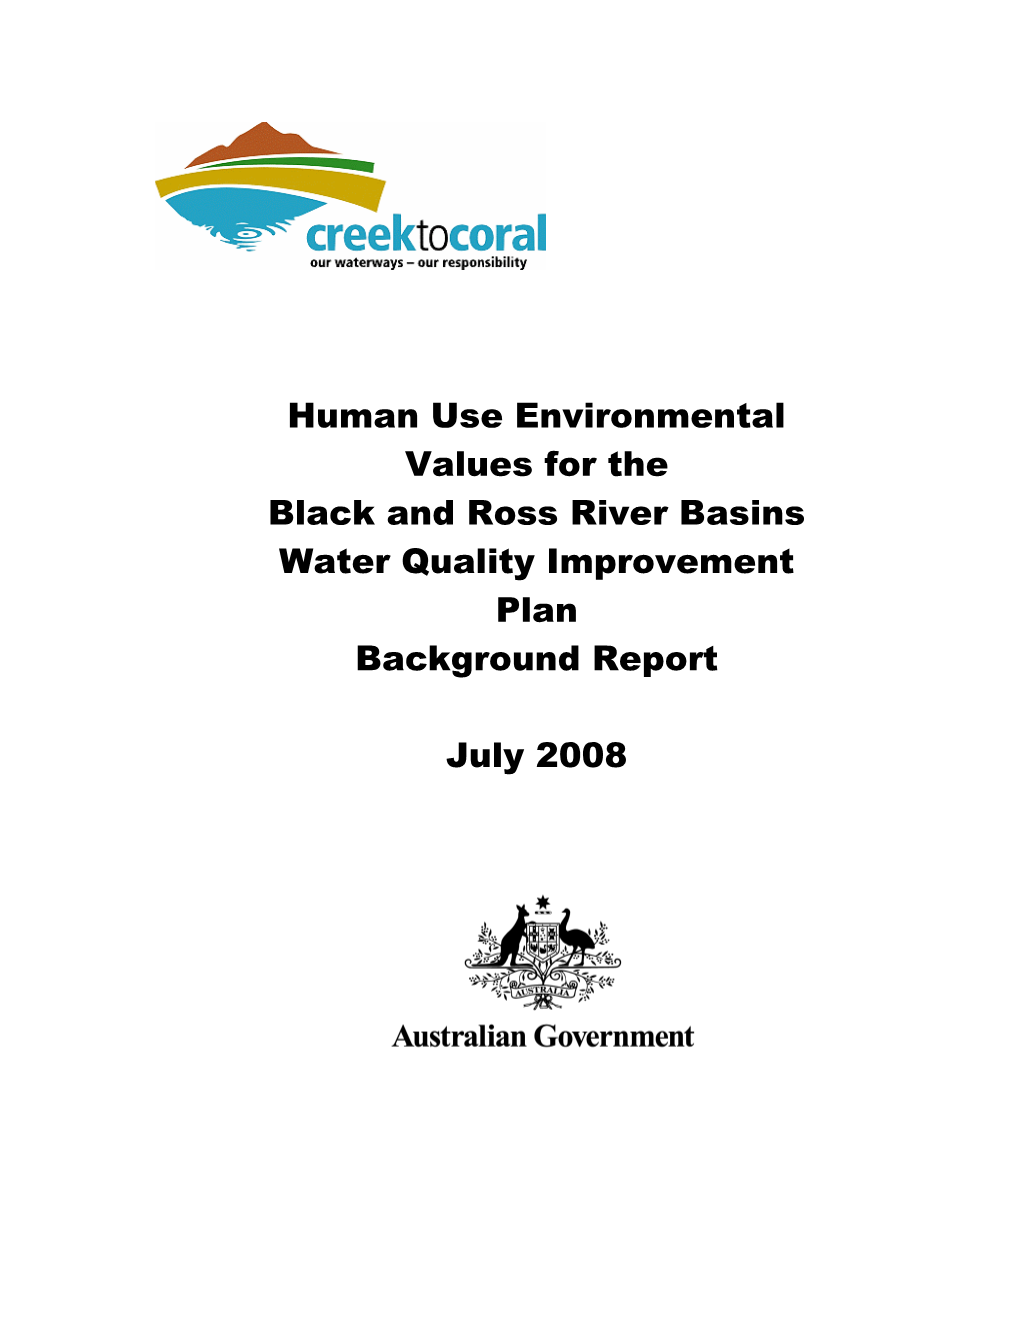 Human Use Environmental Values for the Black and Ross River Basins